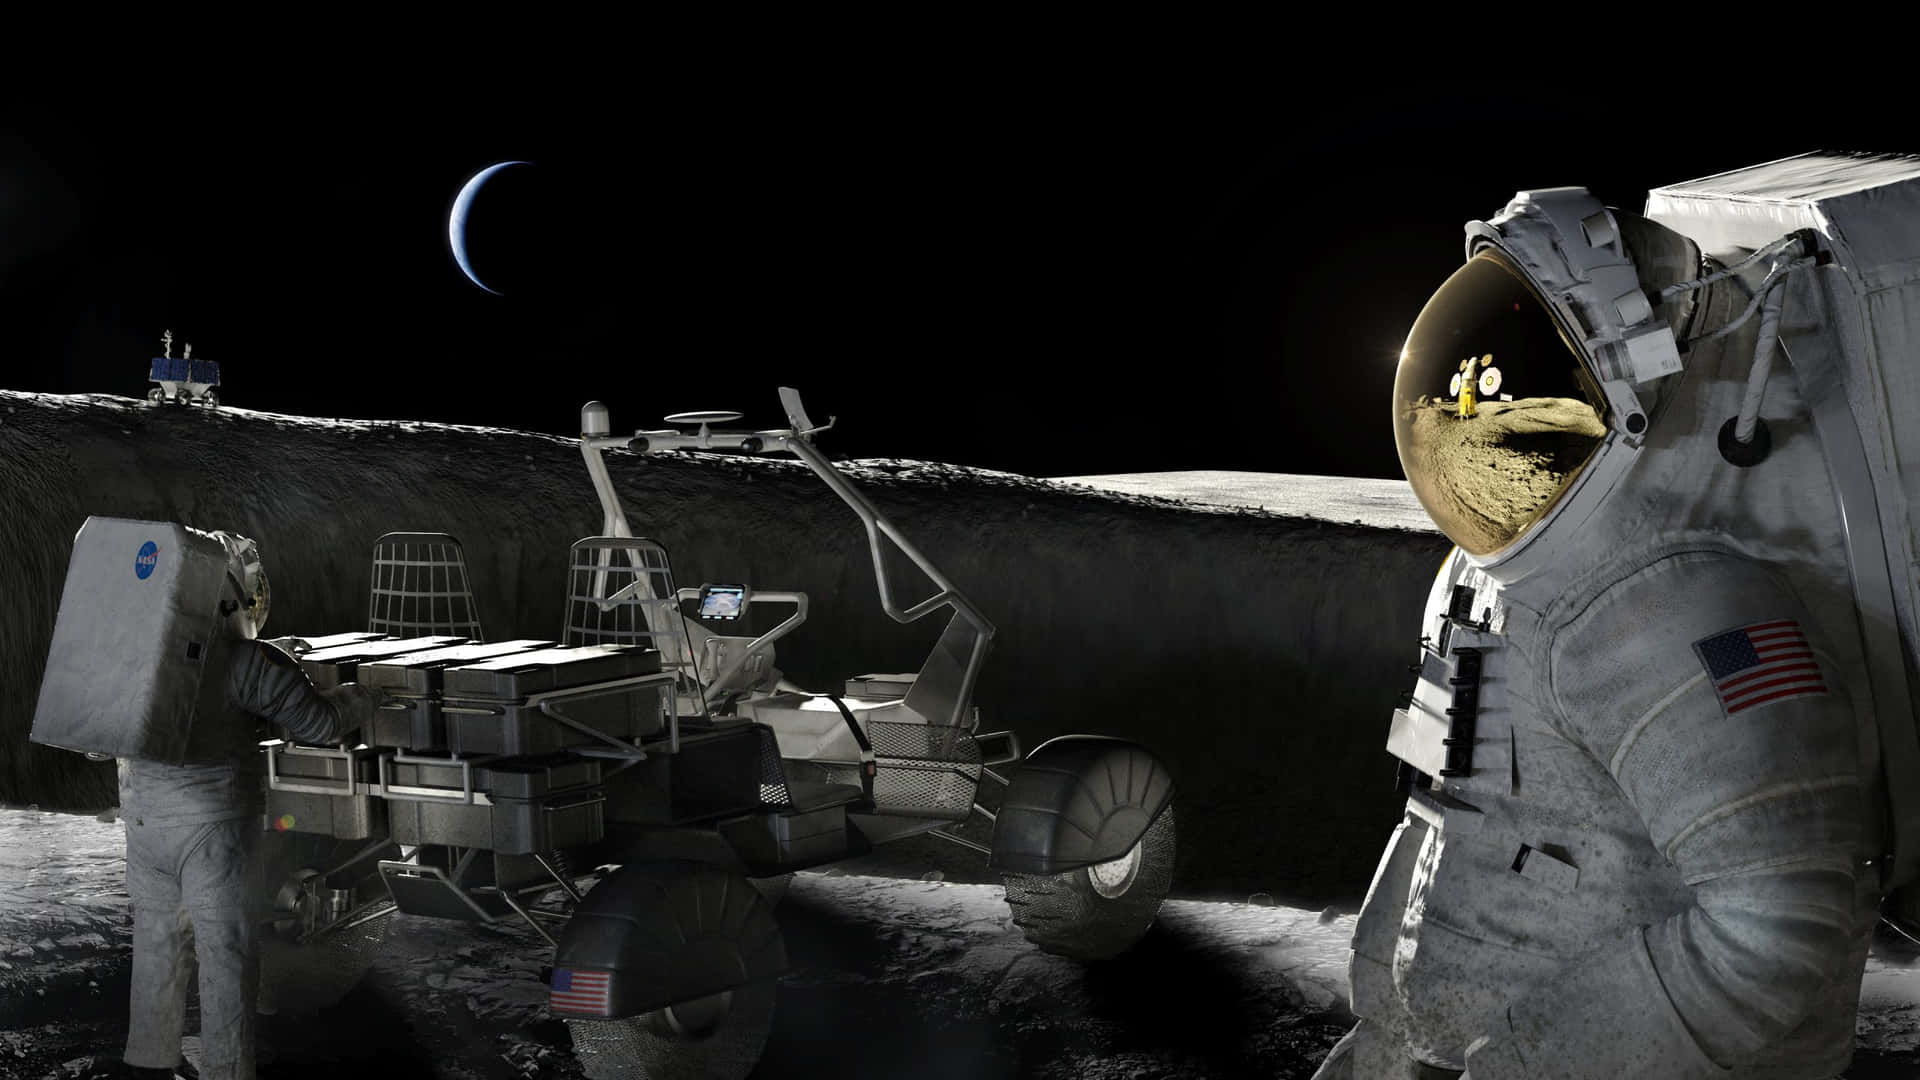 Astronauts_and_ Lunar_ Rover_on_ Moon Wallpaper